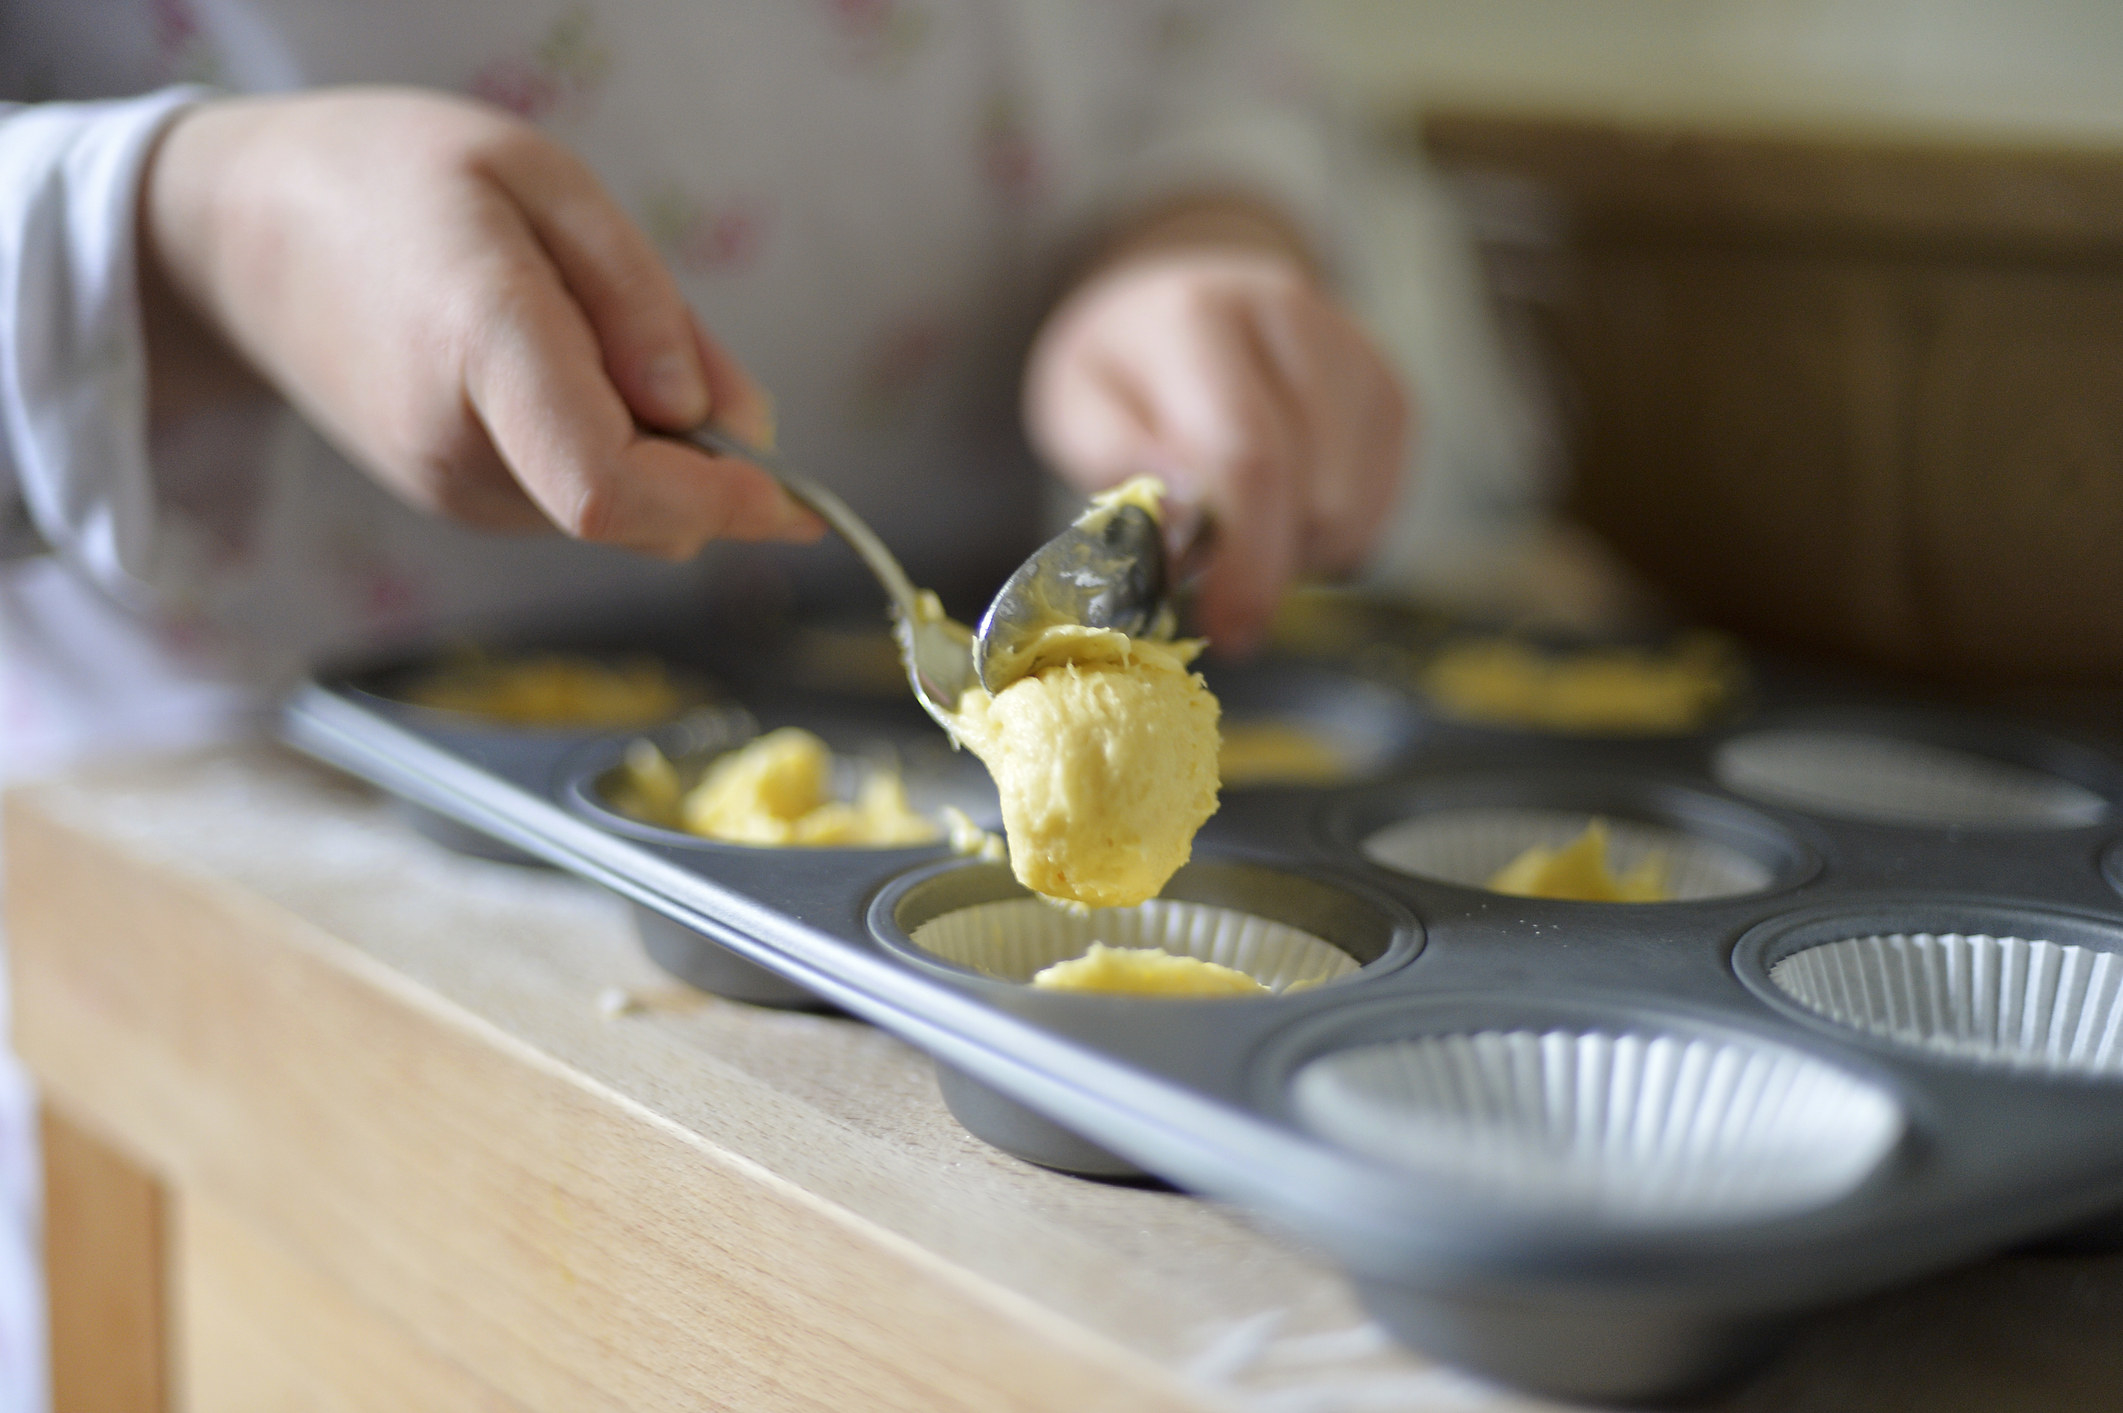 A person making muffins